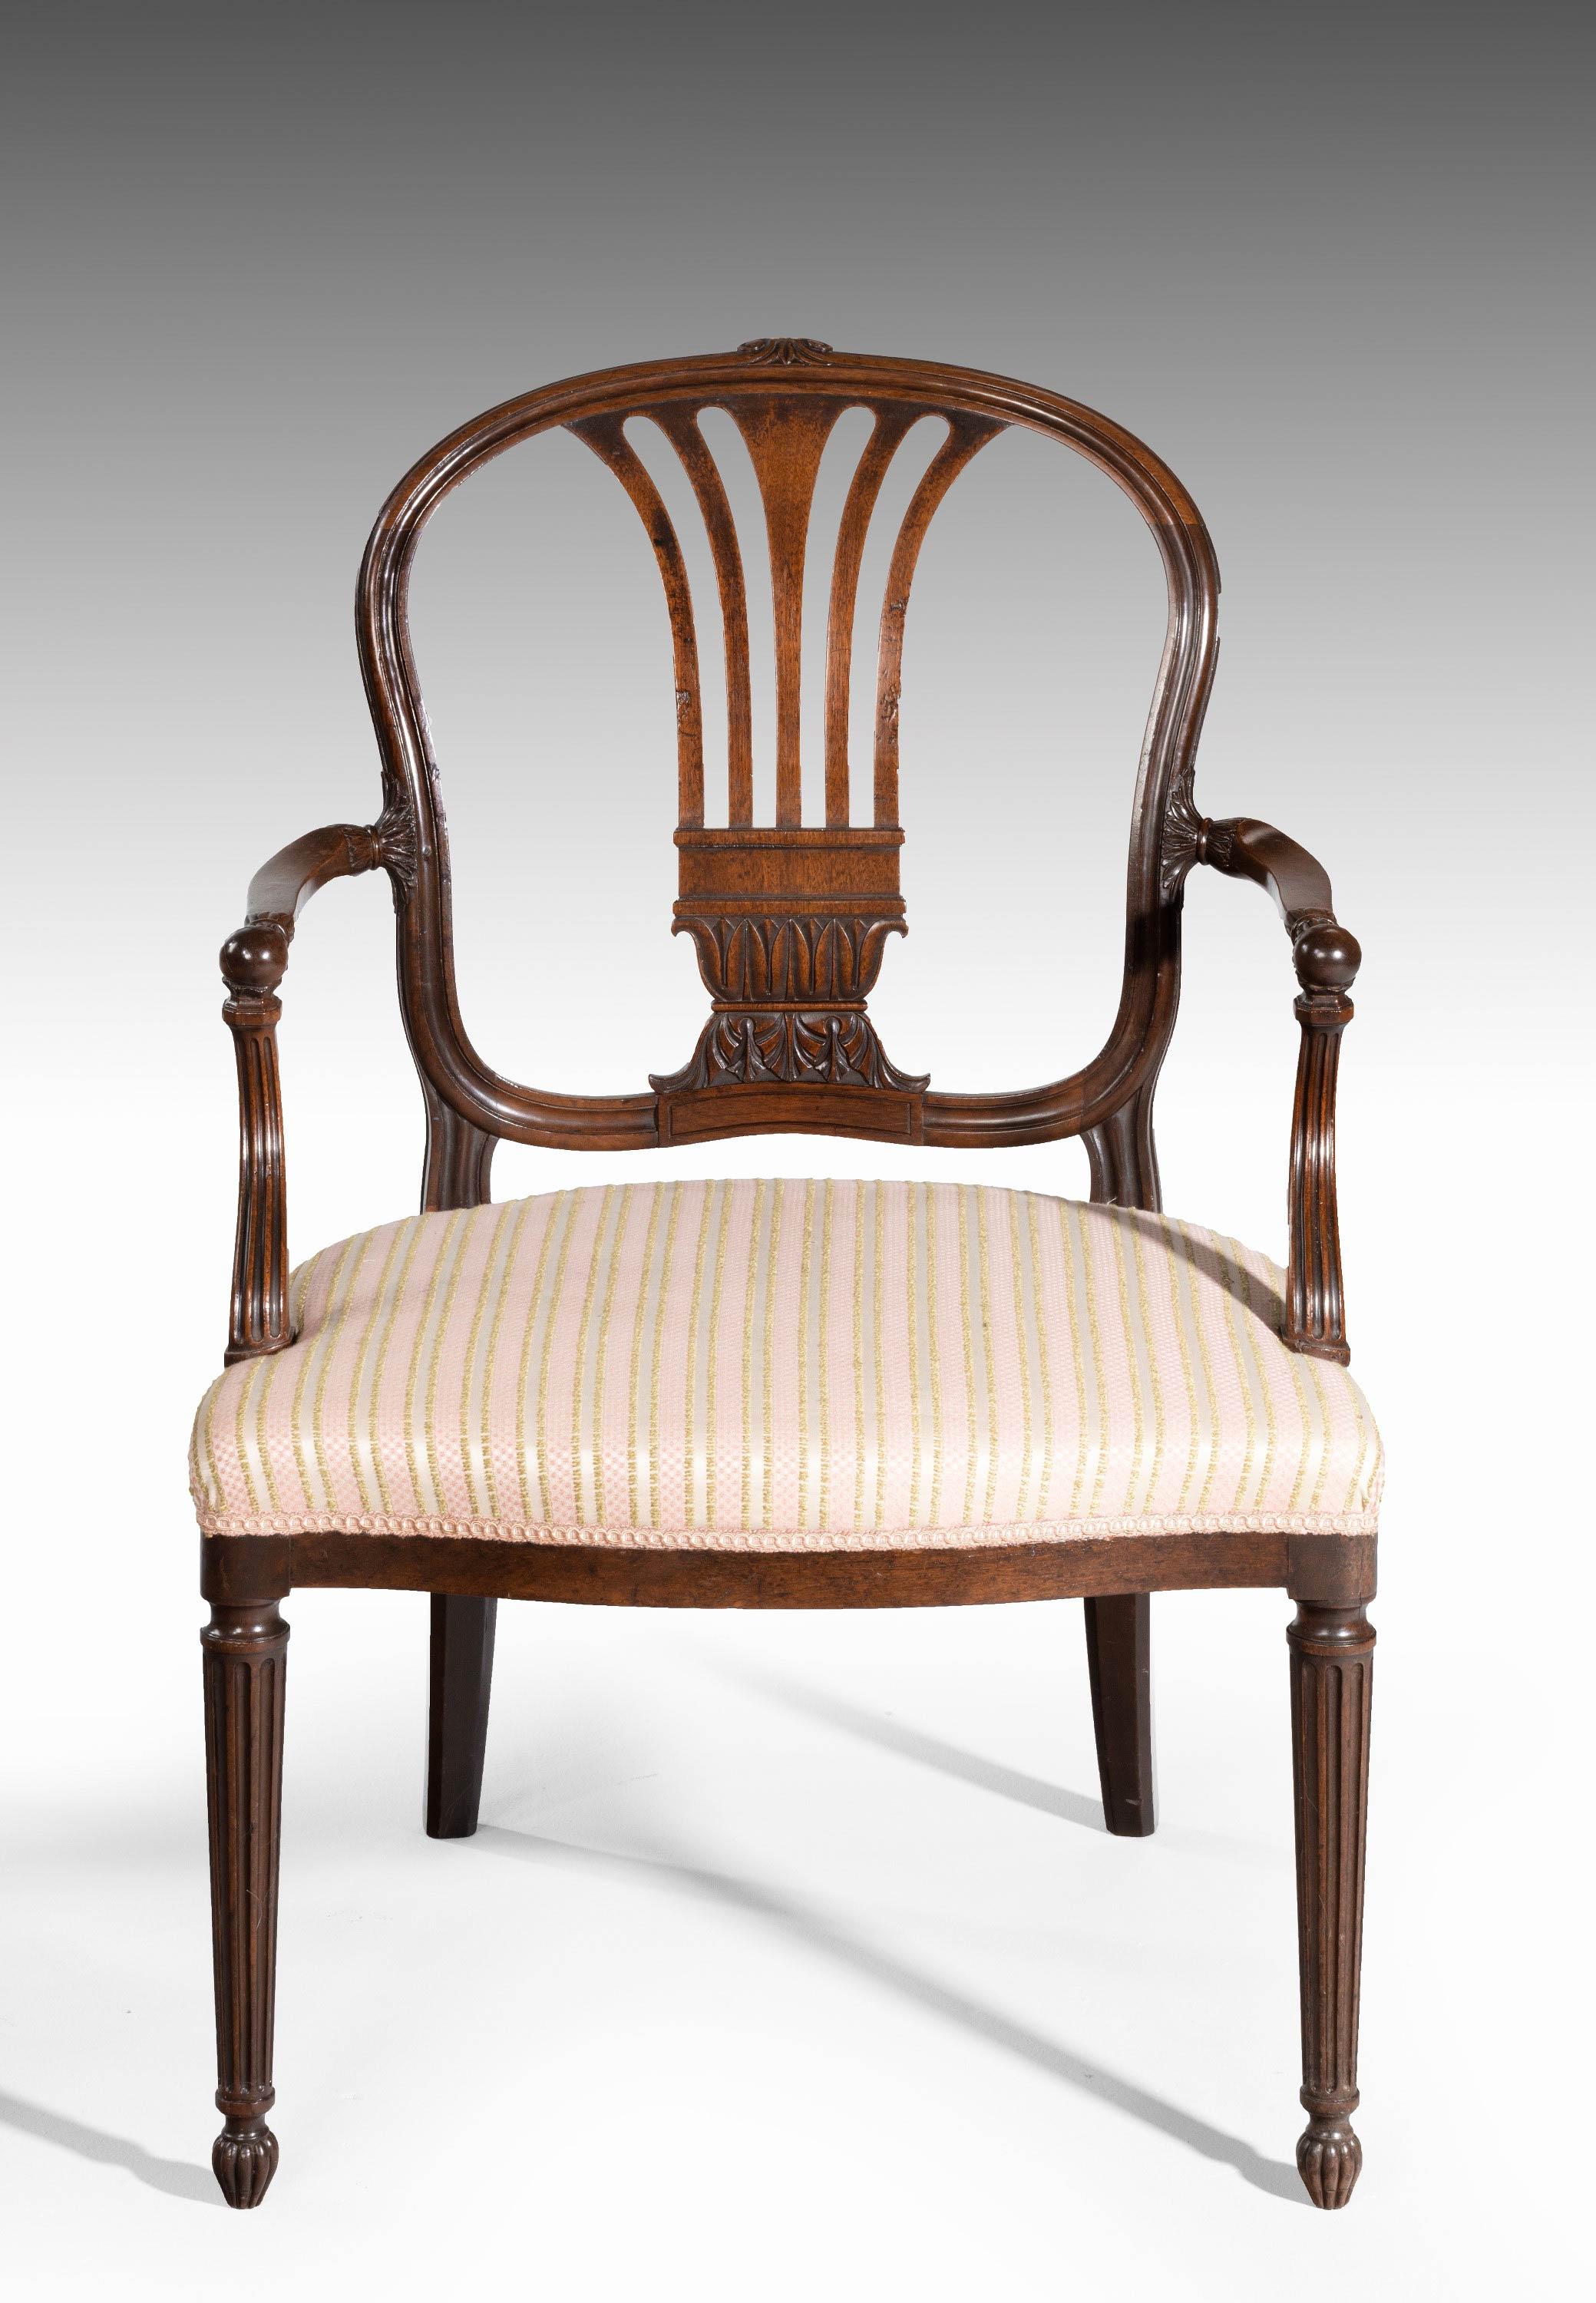 Pair of George III Period Mahogany Elbow Chairs by Robert Manwaring In Good Condition In Peterborough, Northamptonshire